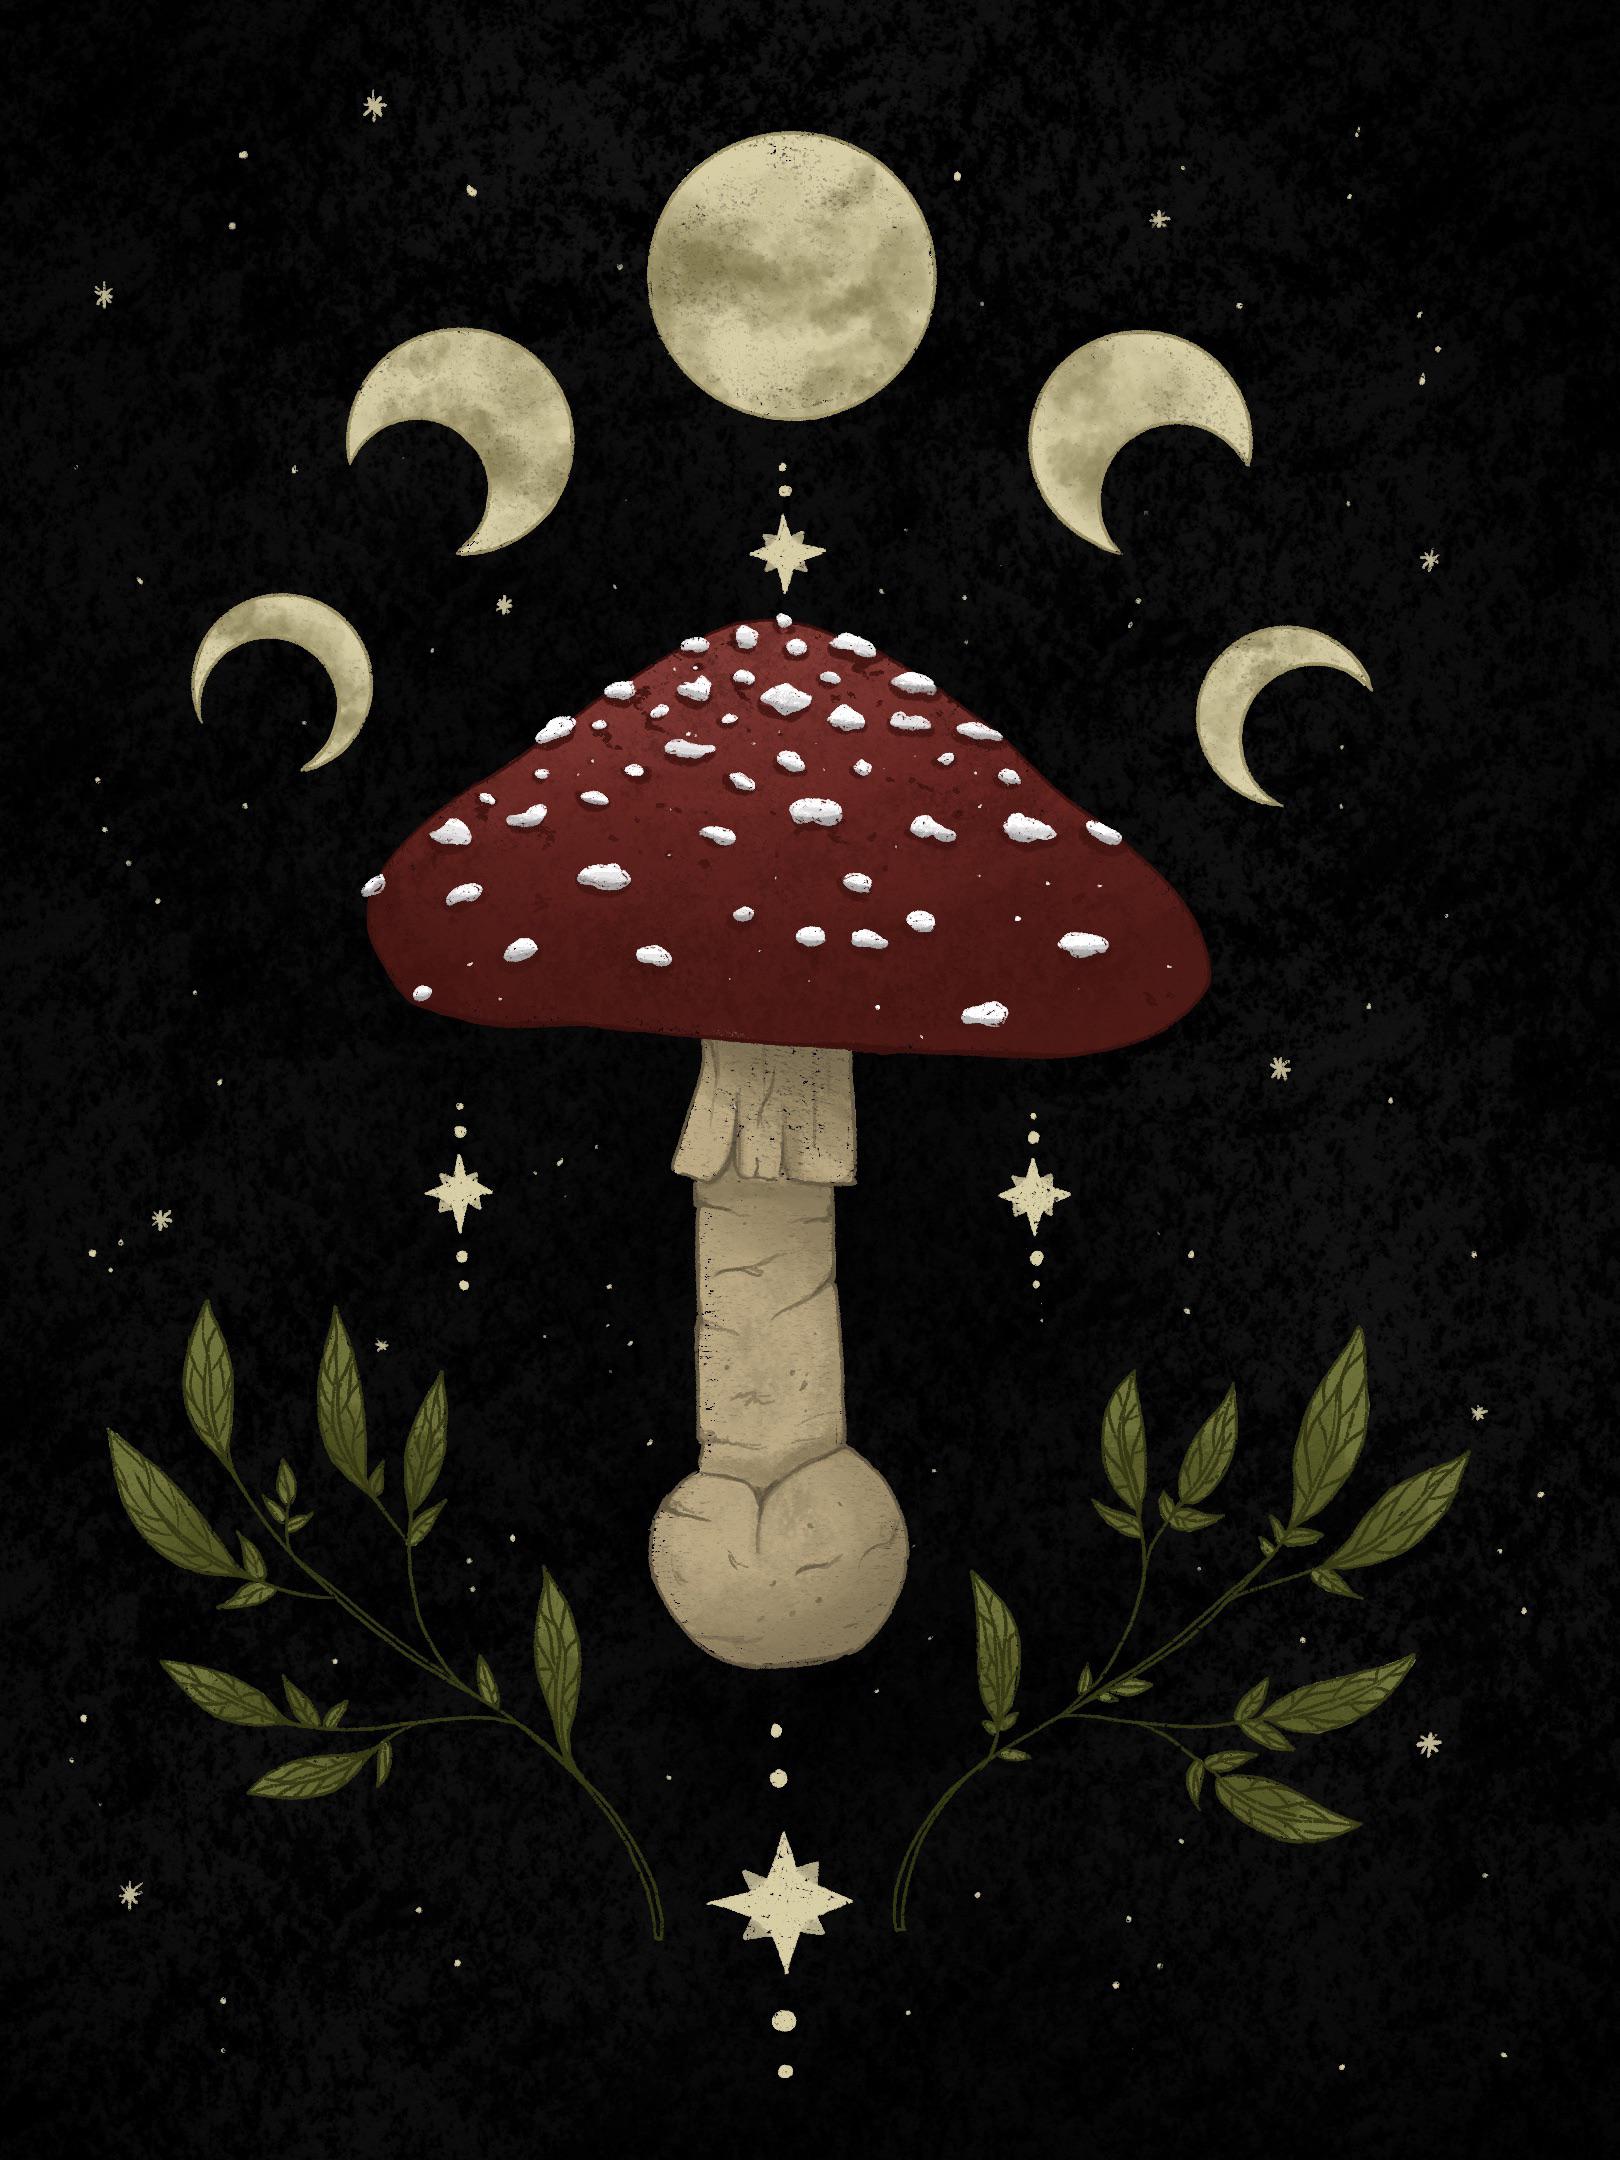 I tried making this mushroom artwork as practice and I thought you guys would appreciate it